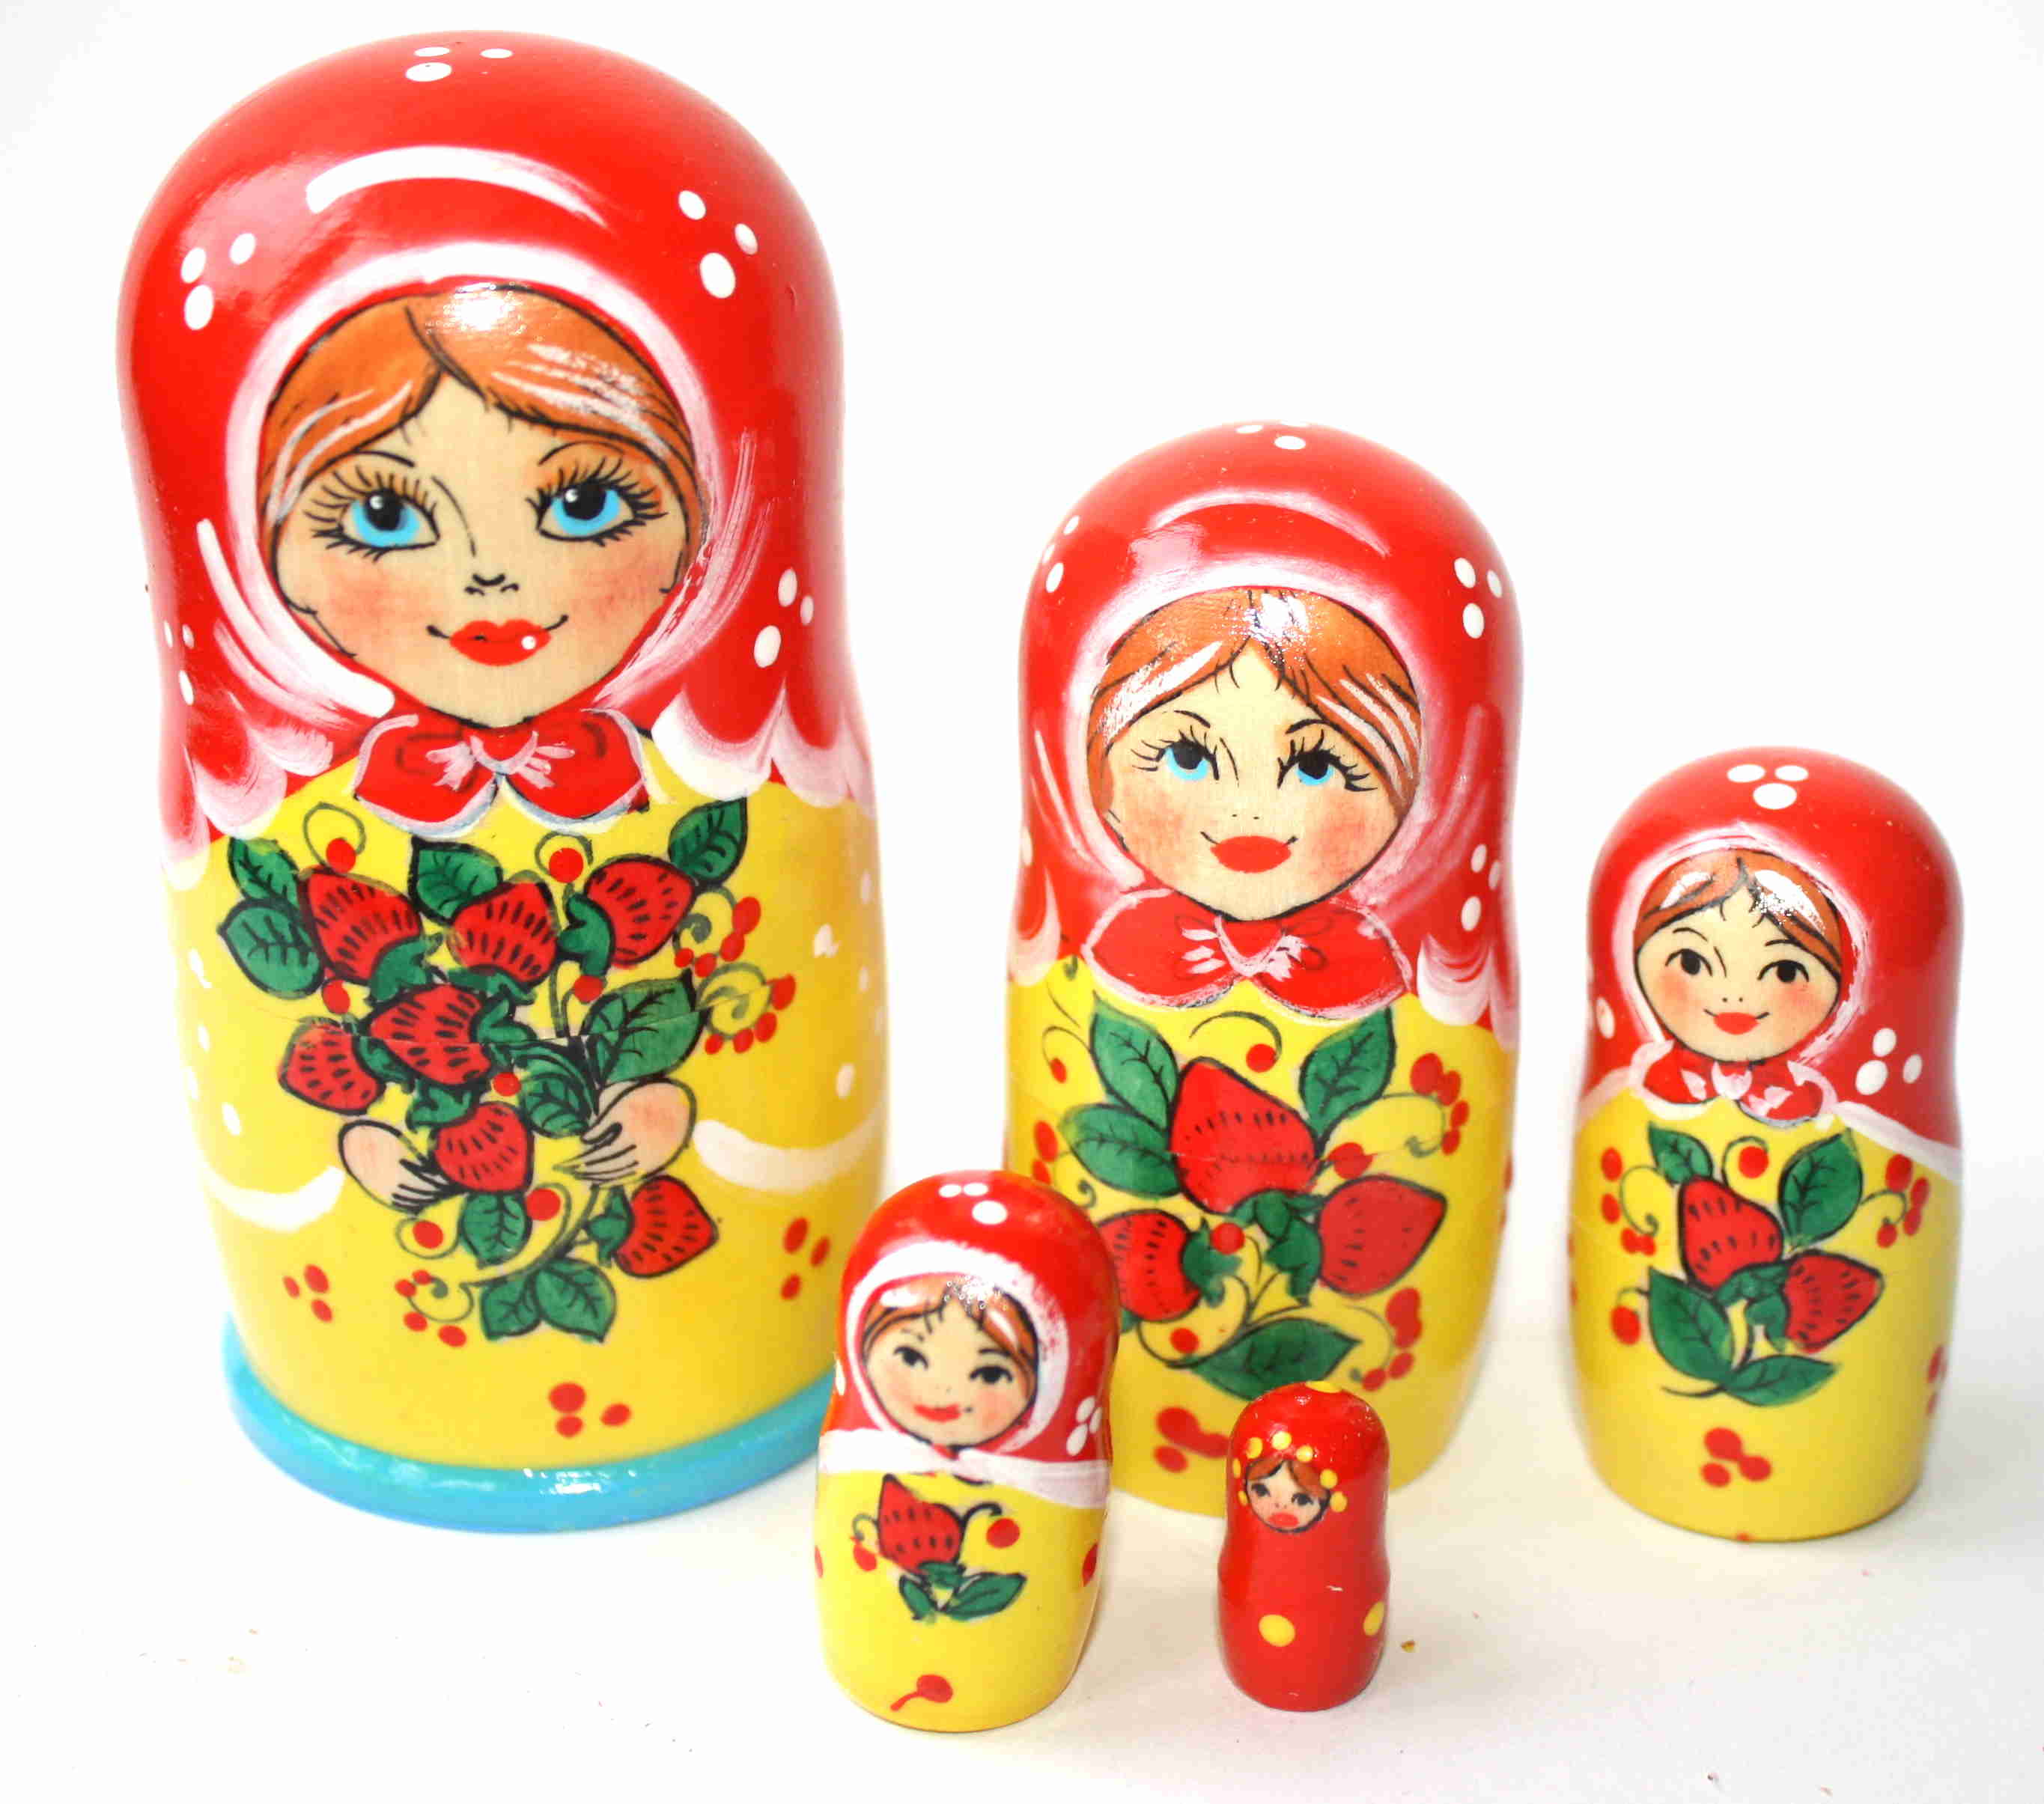 Artists Matryoshka Red Girl With Strawberries (5 nested set)